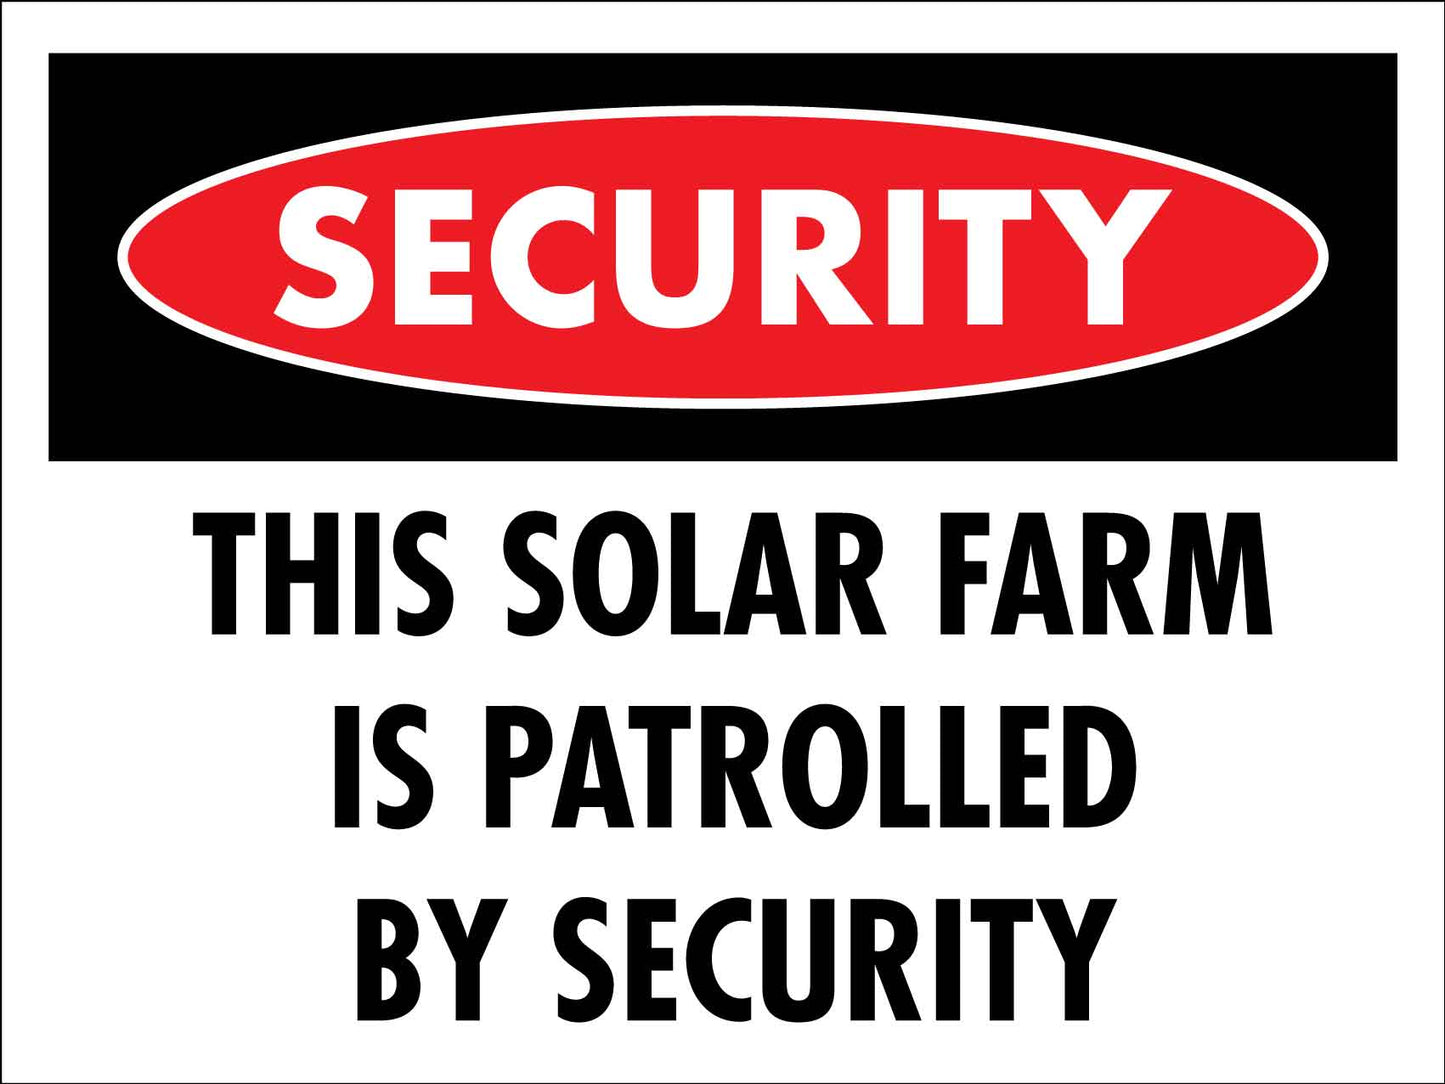 Security This Solar Farm Is Patrolled By Security Sign